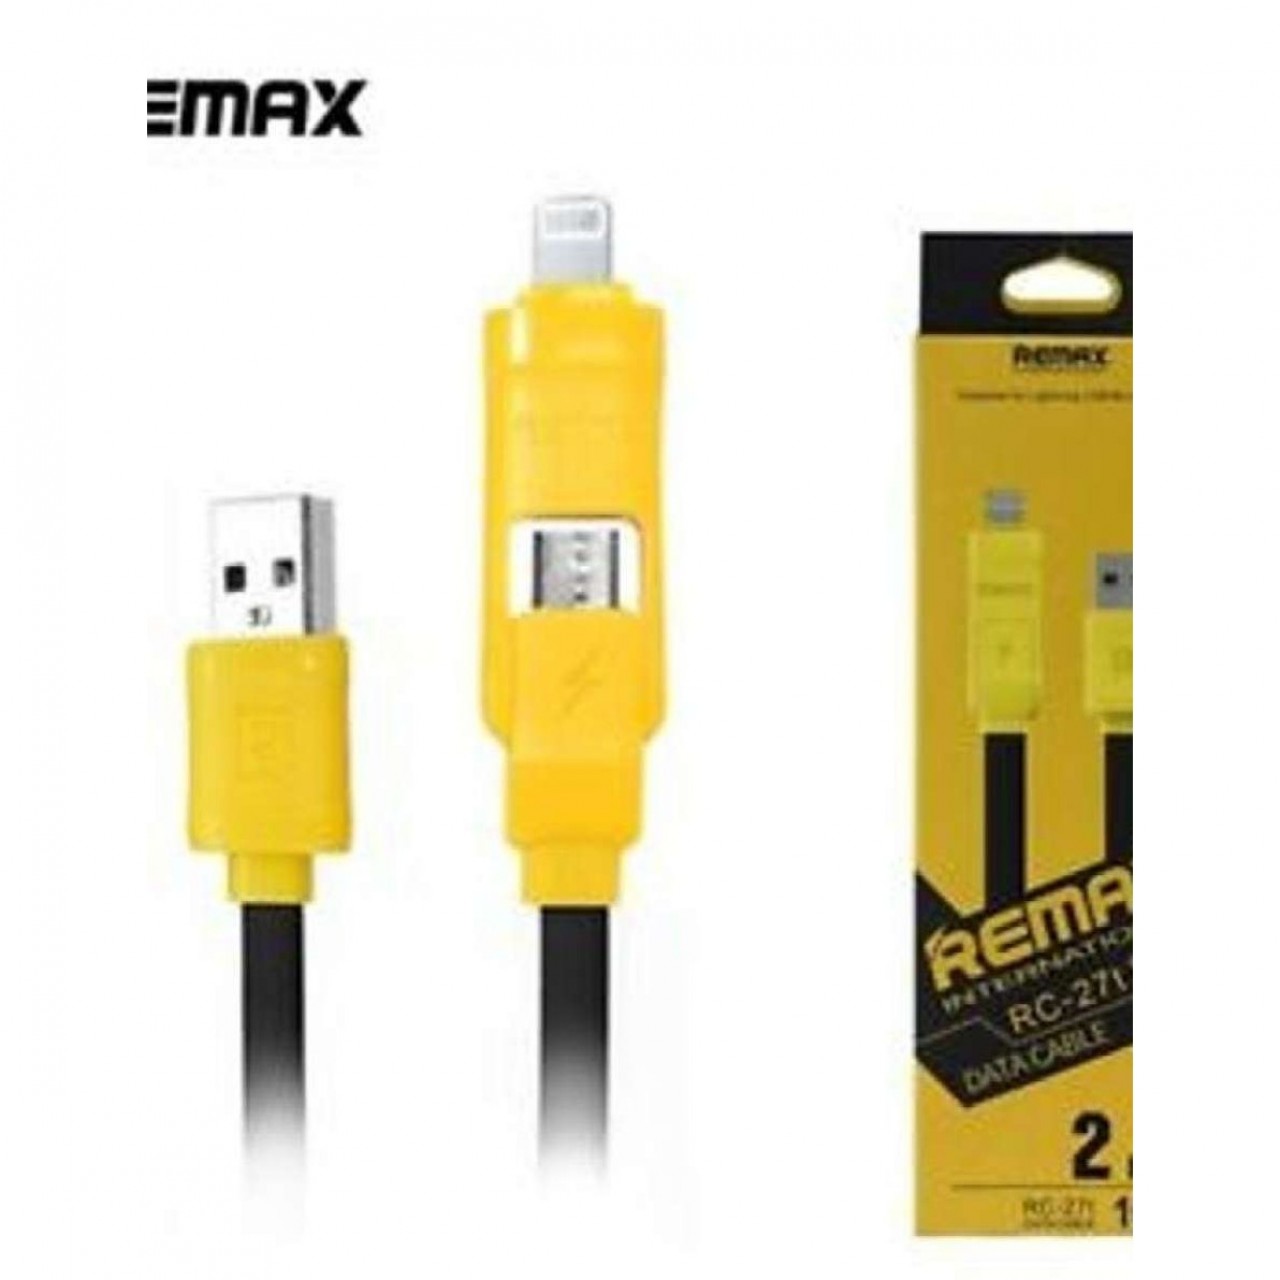 REMAX-Rc27T Mobile Data Cable - 2 In 1